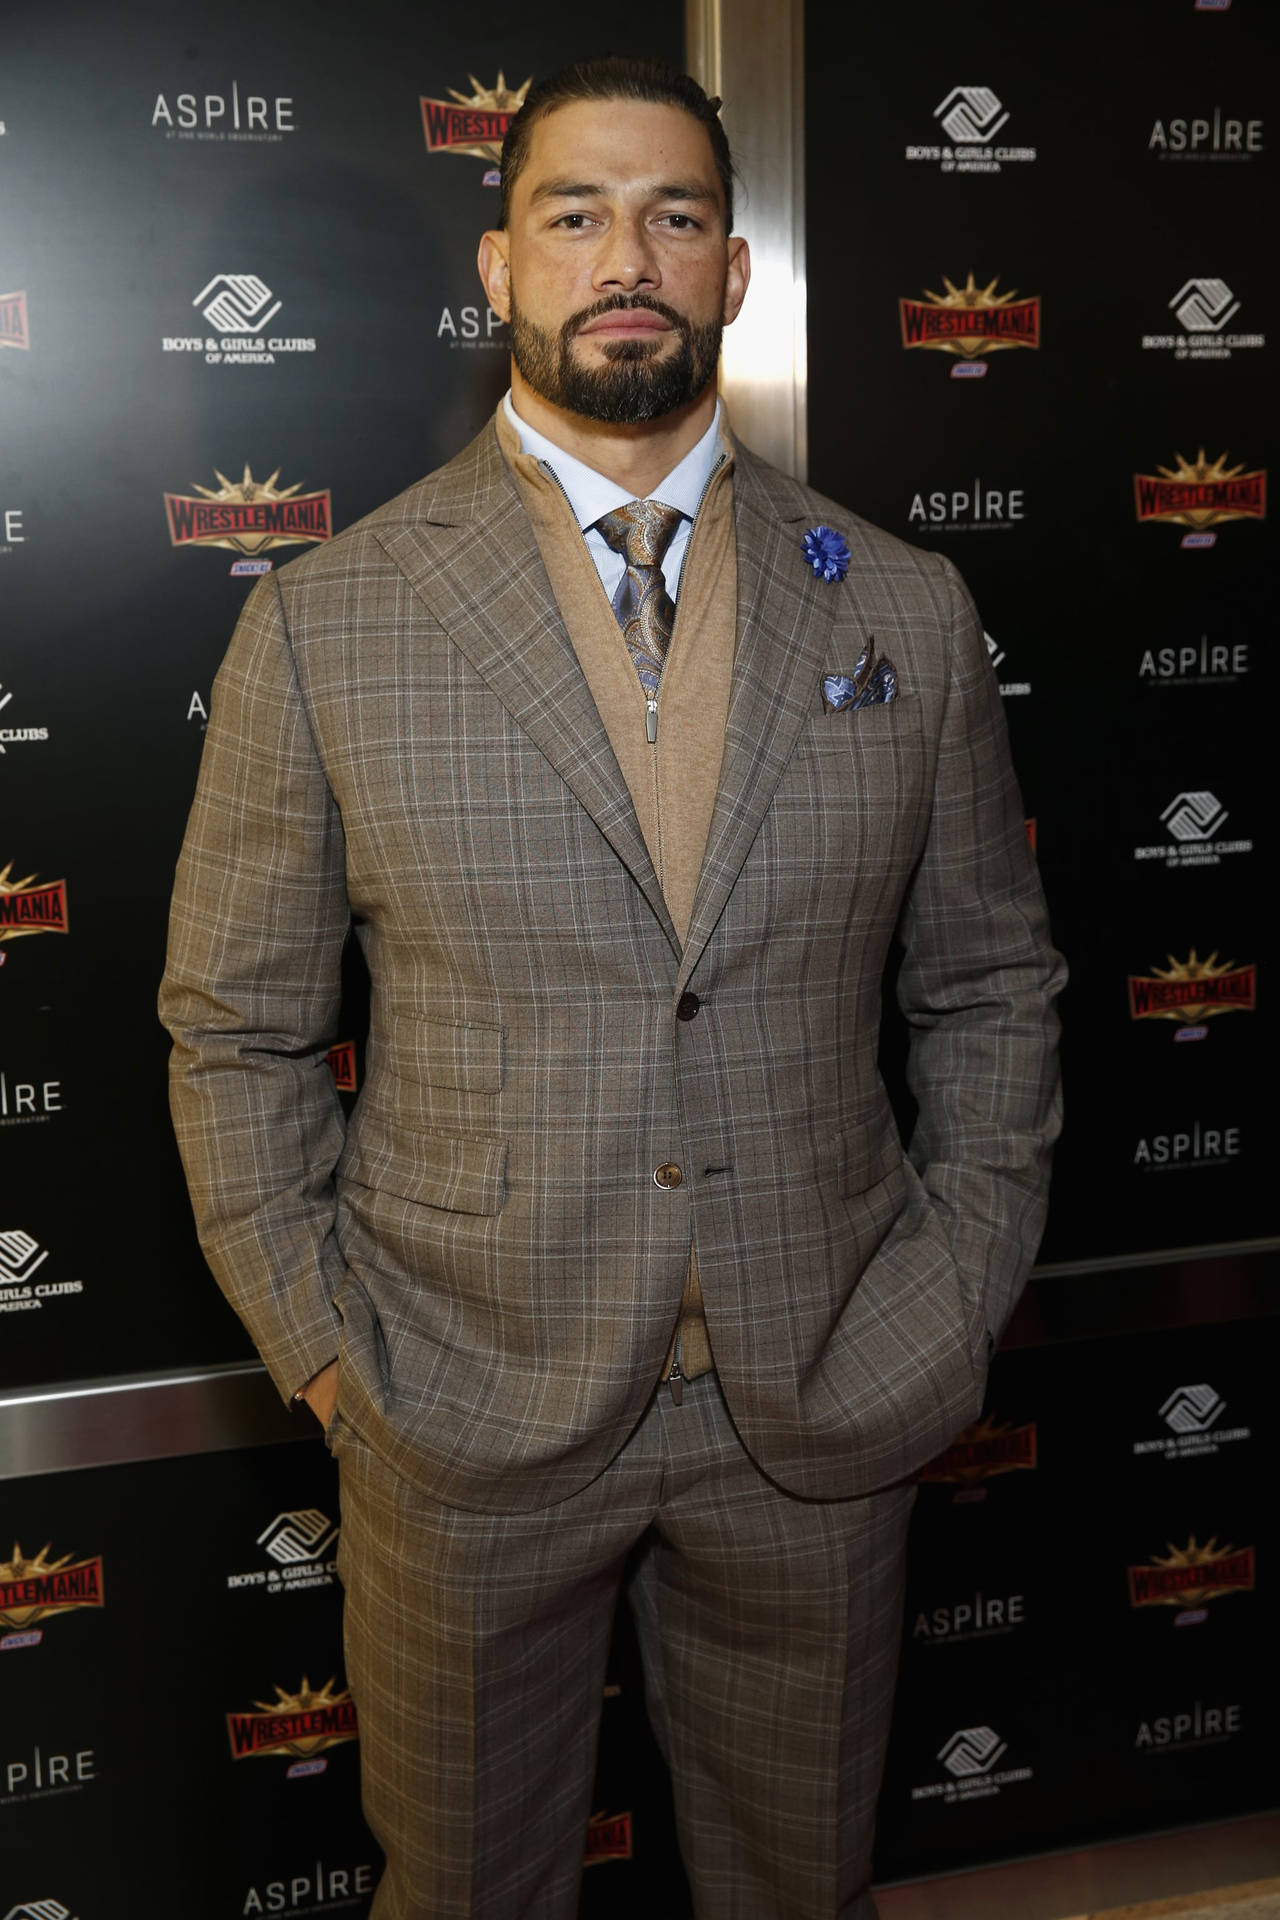 Roman Reigns Delivers Inspirational Hope Speech At The 2019 Reception. Background